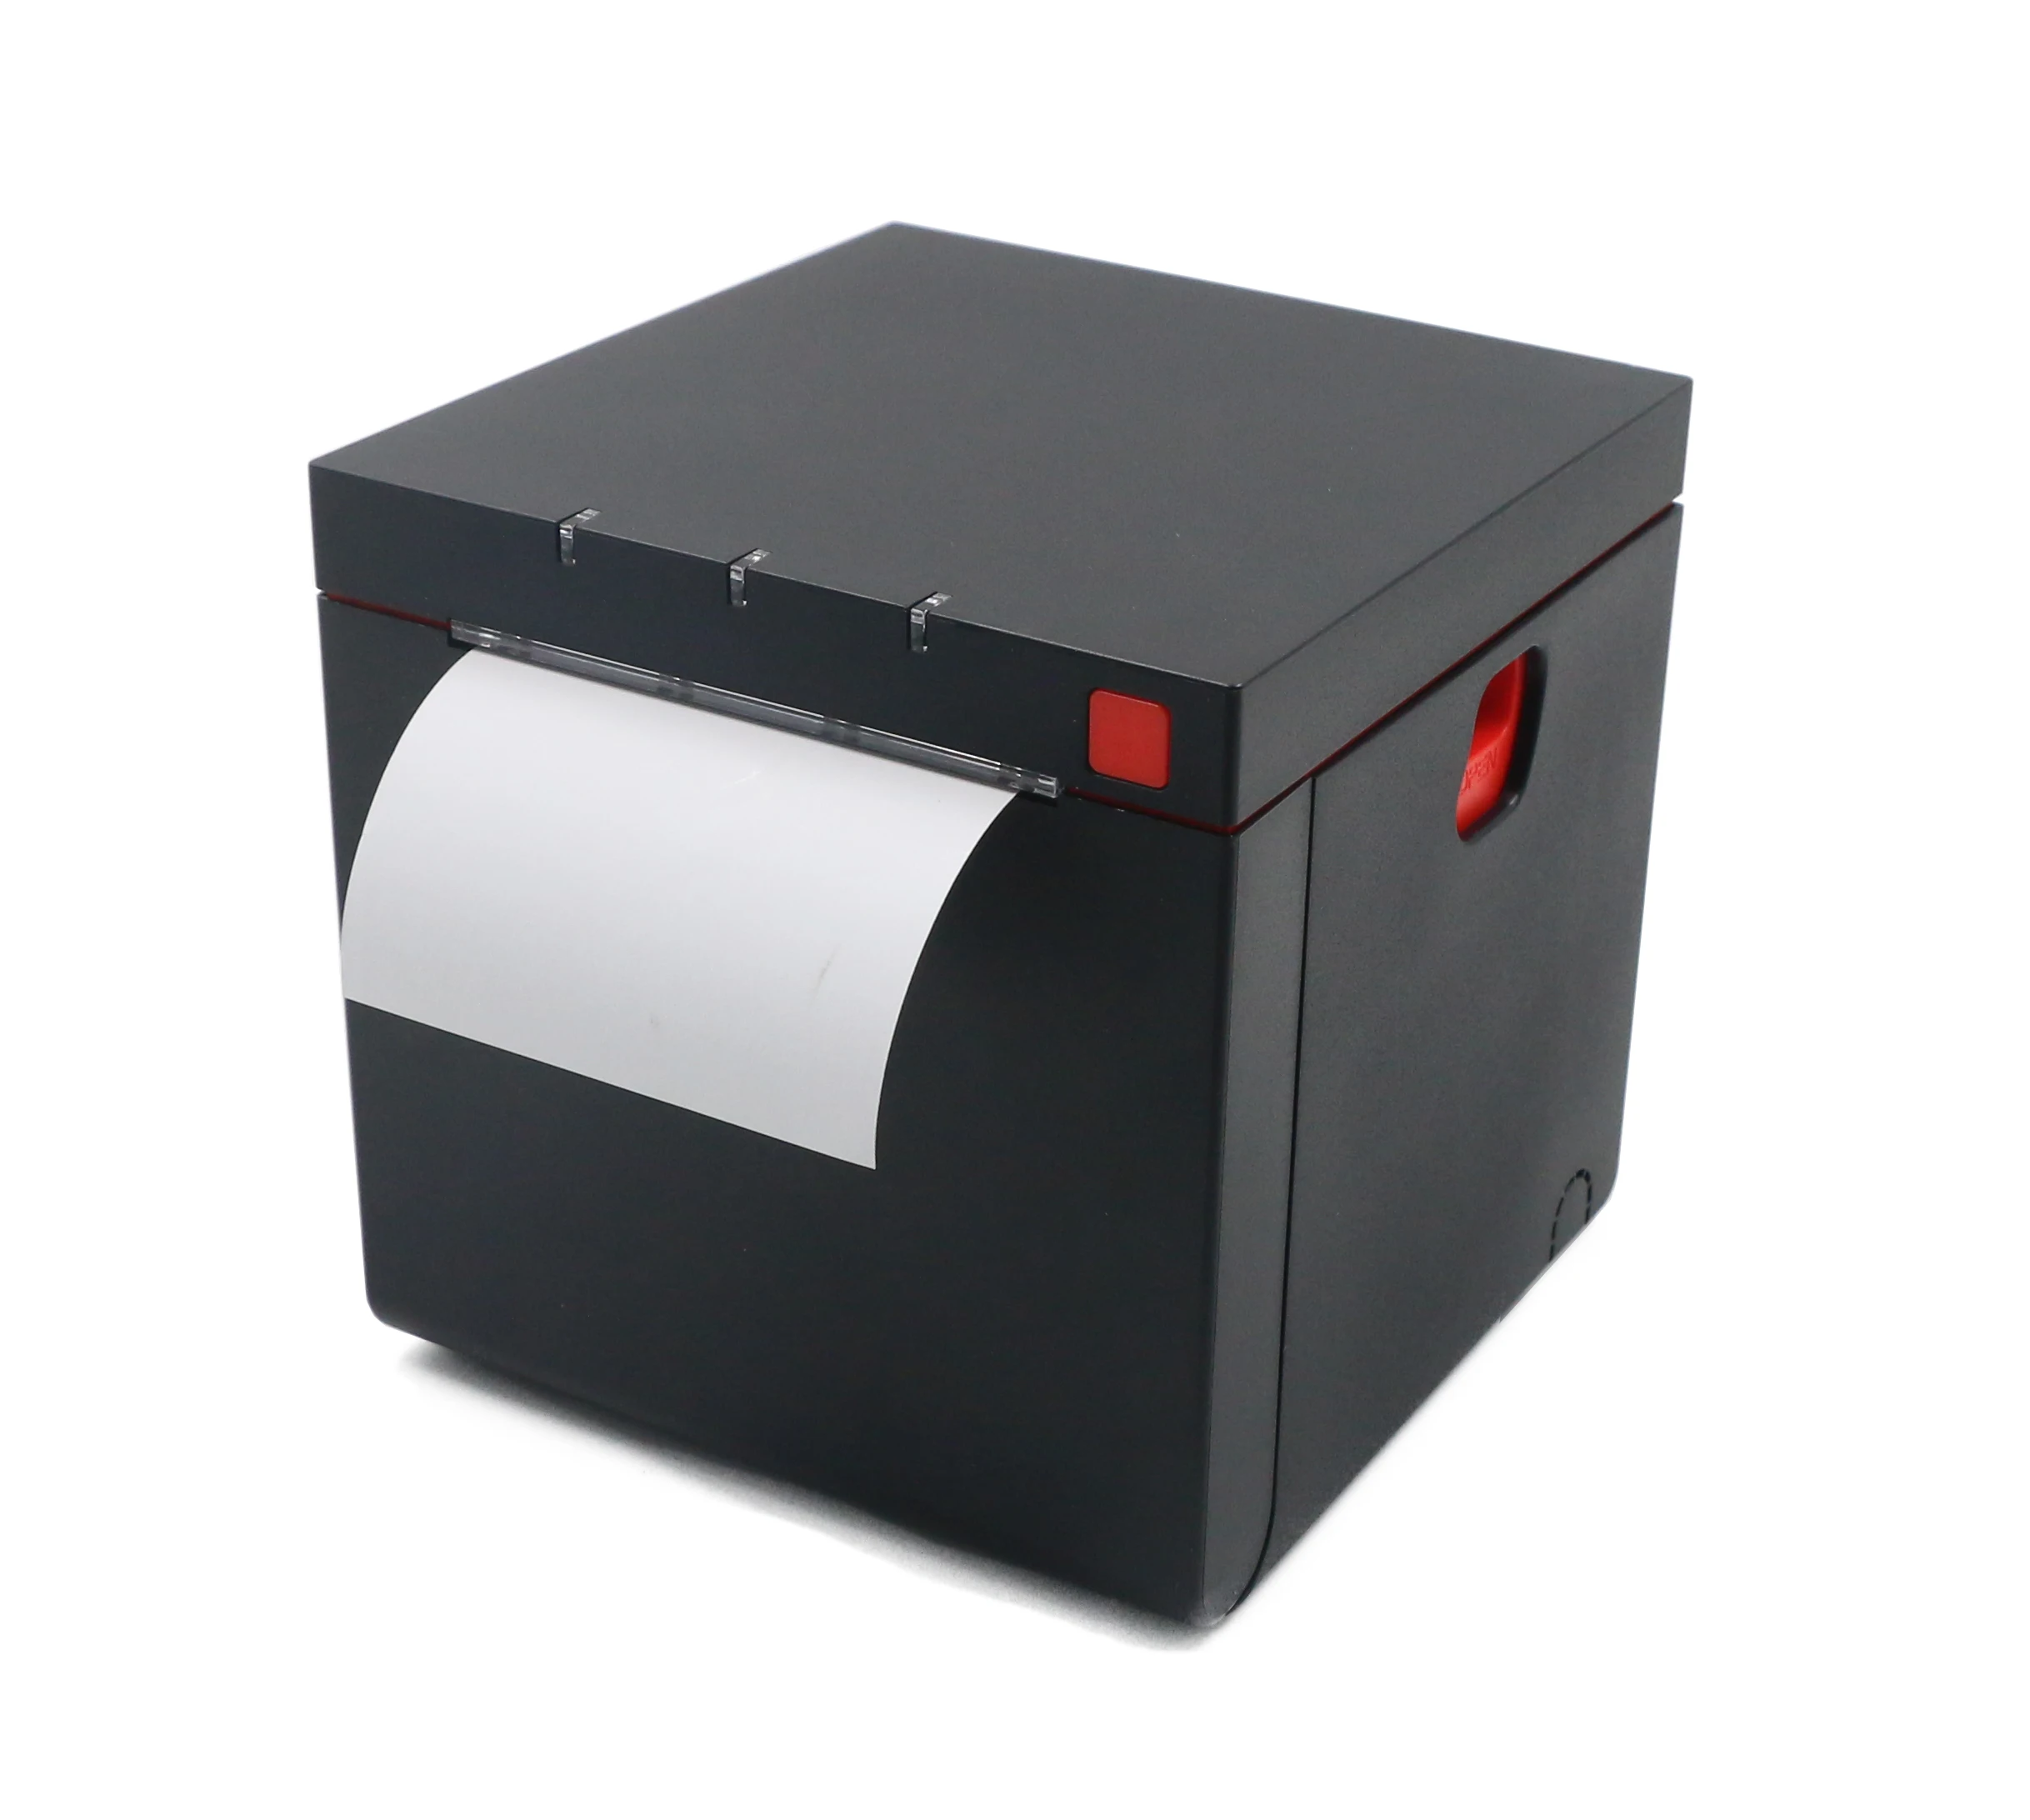 

Hot Sales Thermal 80mm POS Printer Thermal Bill Receipt Printer with Optional Wifi / Blue tooth / USB Receipt Printer